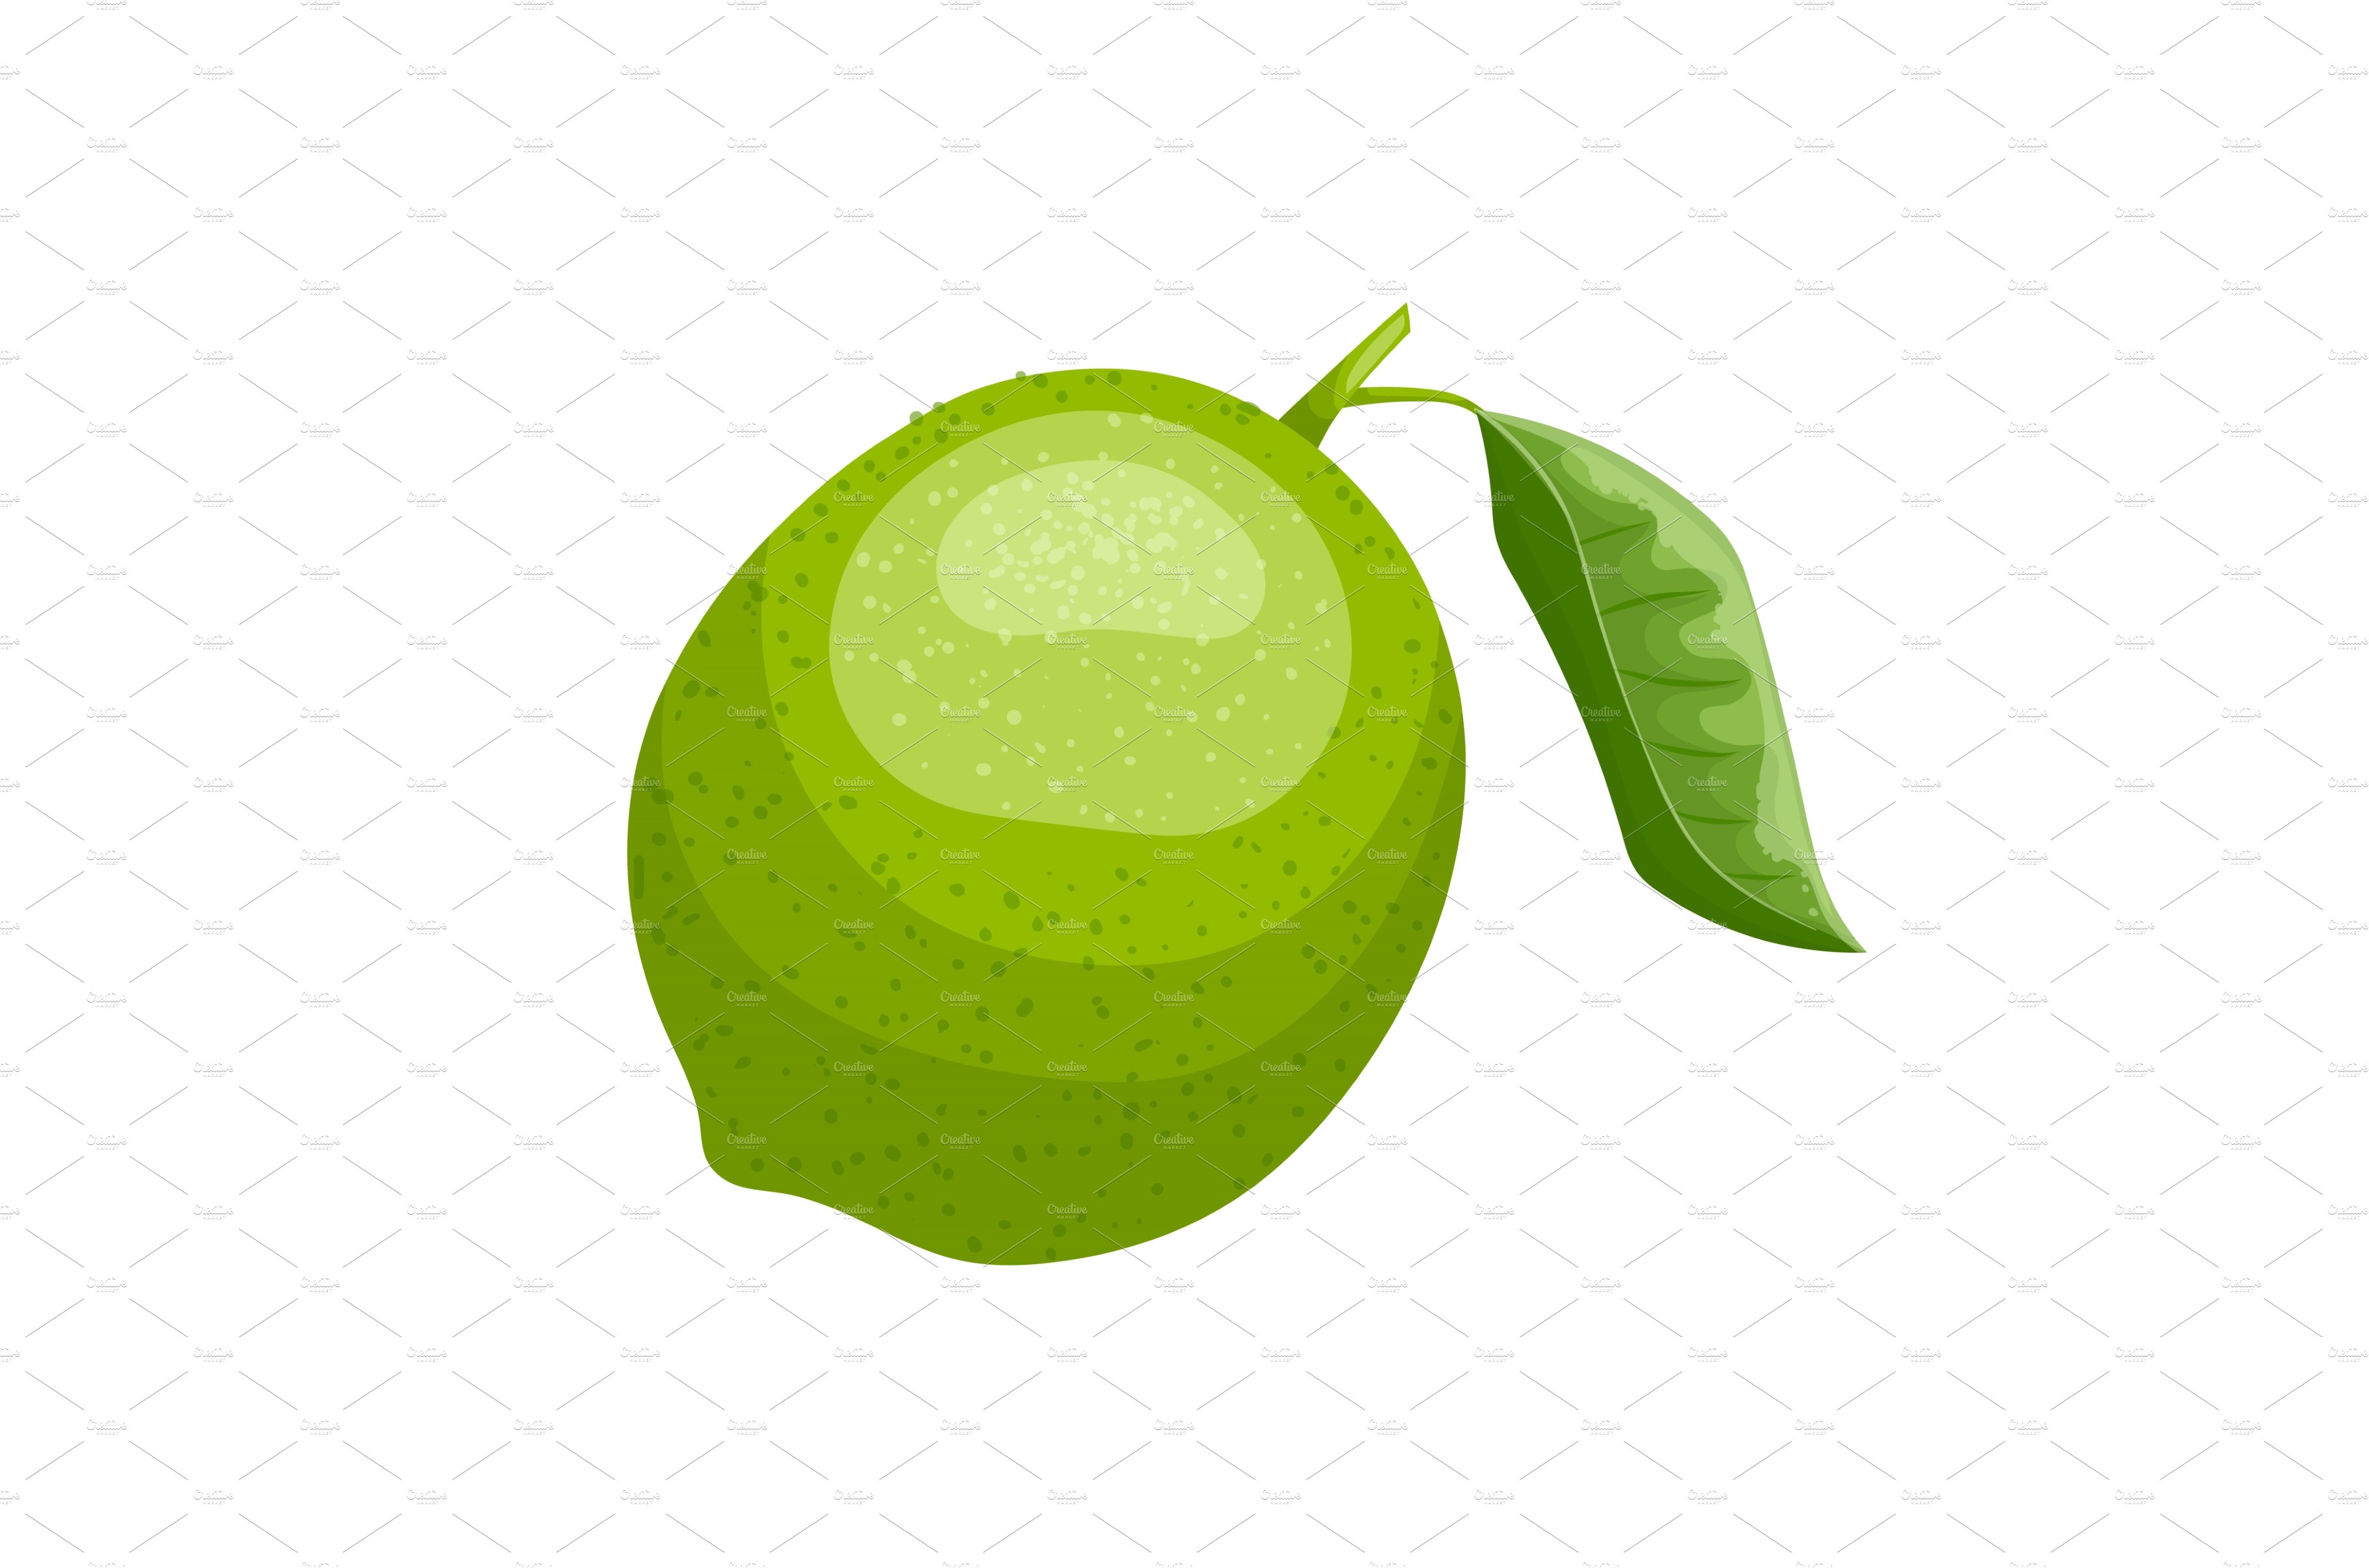 lime fruit cartoon vector cover image.